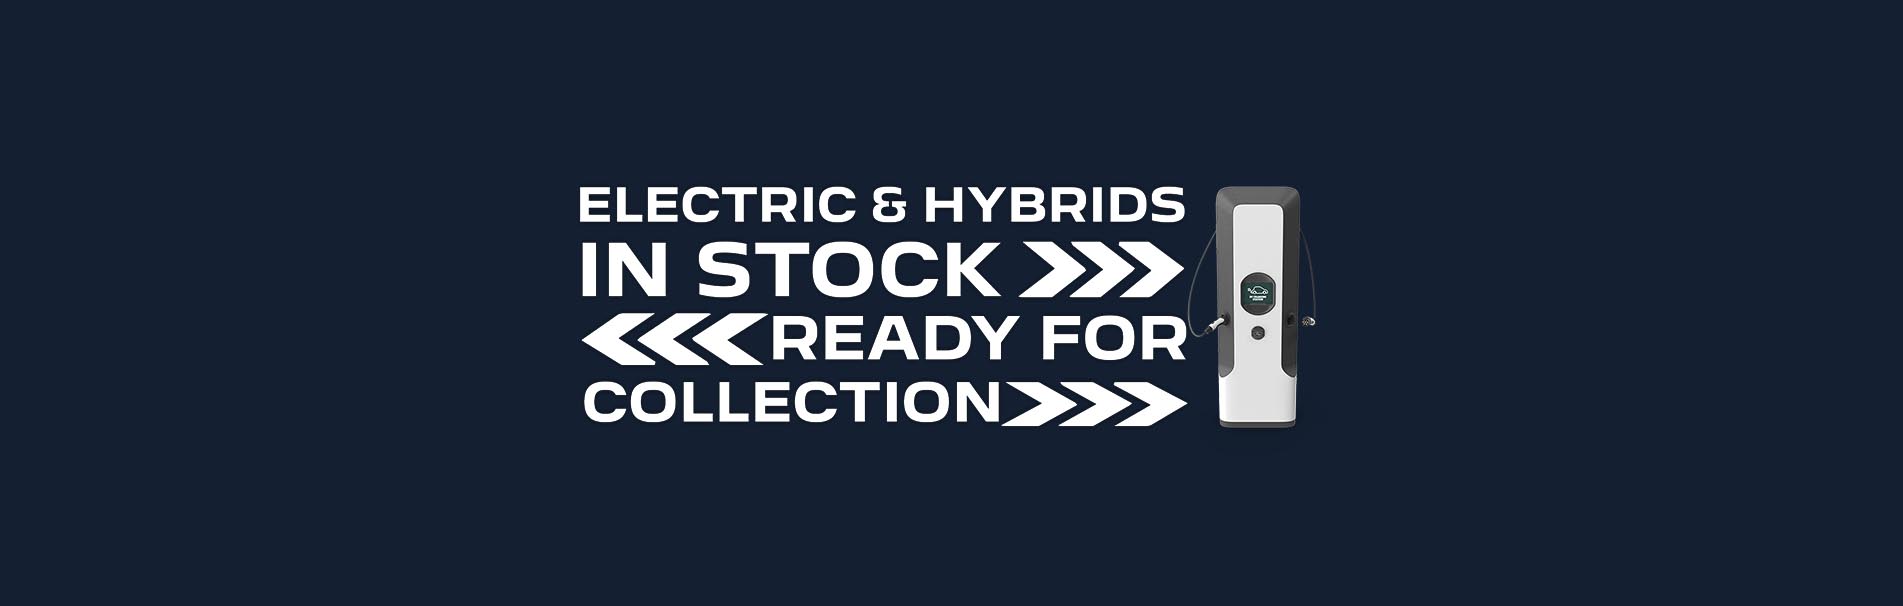 peugeot-Electric-and-hybrids-in-stock-and-ready-for-collection-sli